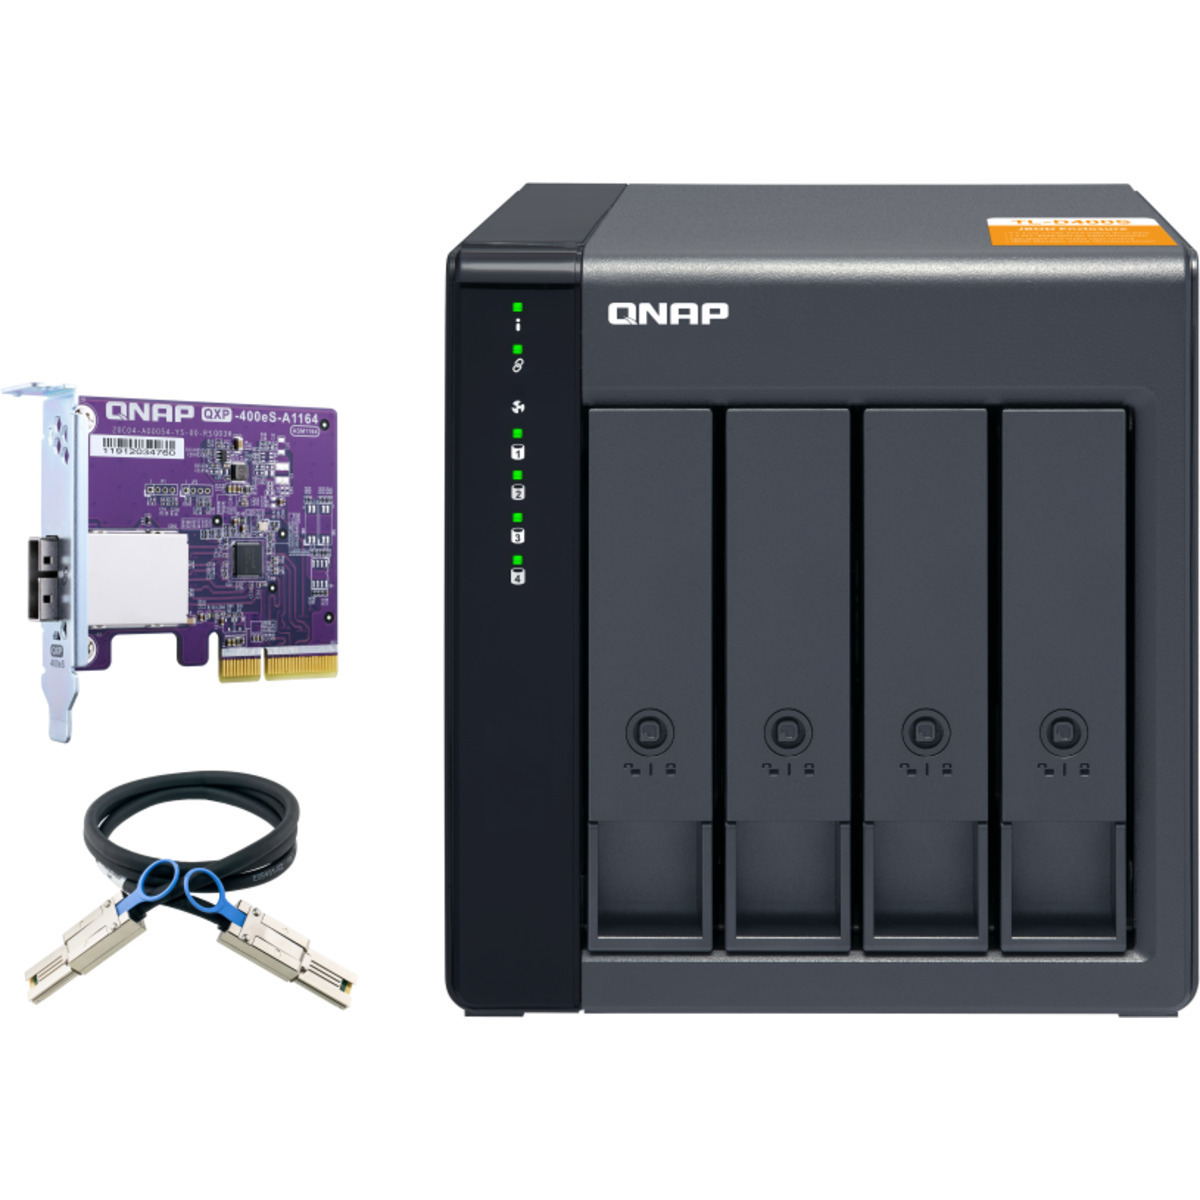 buy QNAP TL-D400S External Expansion Drive 80tb Desktop Expansion Enclosure 4x20000gb Seagate EXOS X20 ST20000NM007D 3.5 7200rpm SATA 6Gb/s HDD ENTERPRISE Class Drives Installed - Burn-In Tested - nas headquarters buy network attached storage server device das new raid-5 free shipping usa spring sale TL-D400S External Expansion Drive